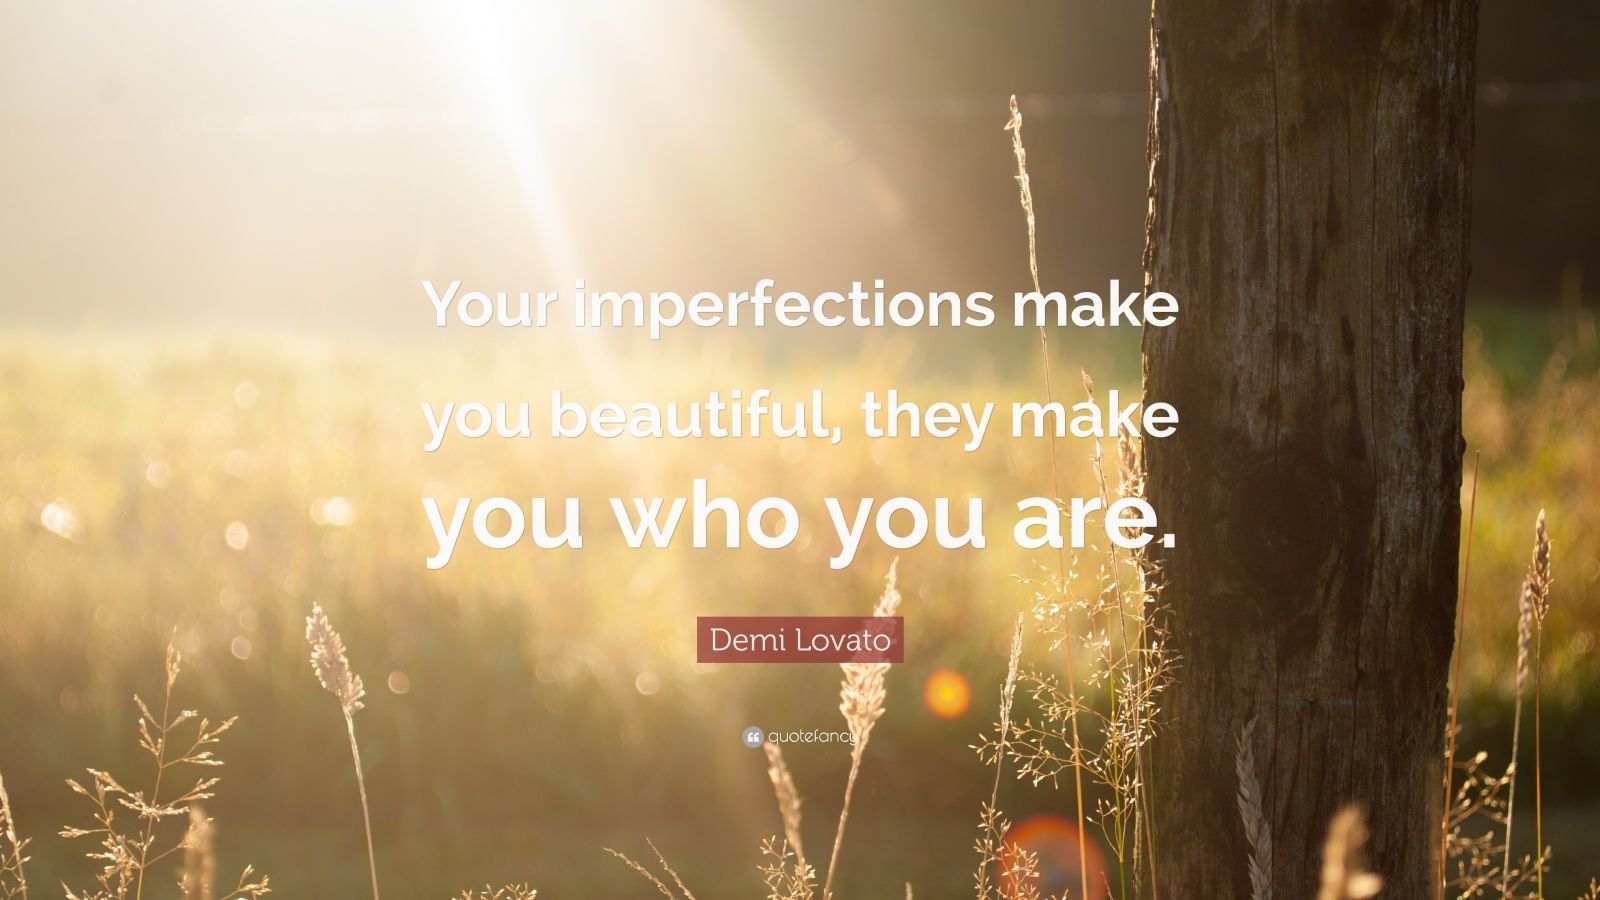 Demi Lovato Quote “your Imperfections Make You Beautiful They Make You Who You Are ”